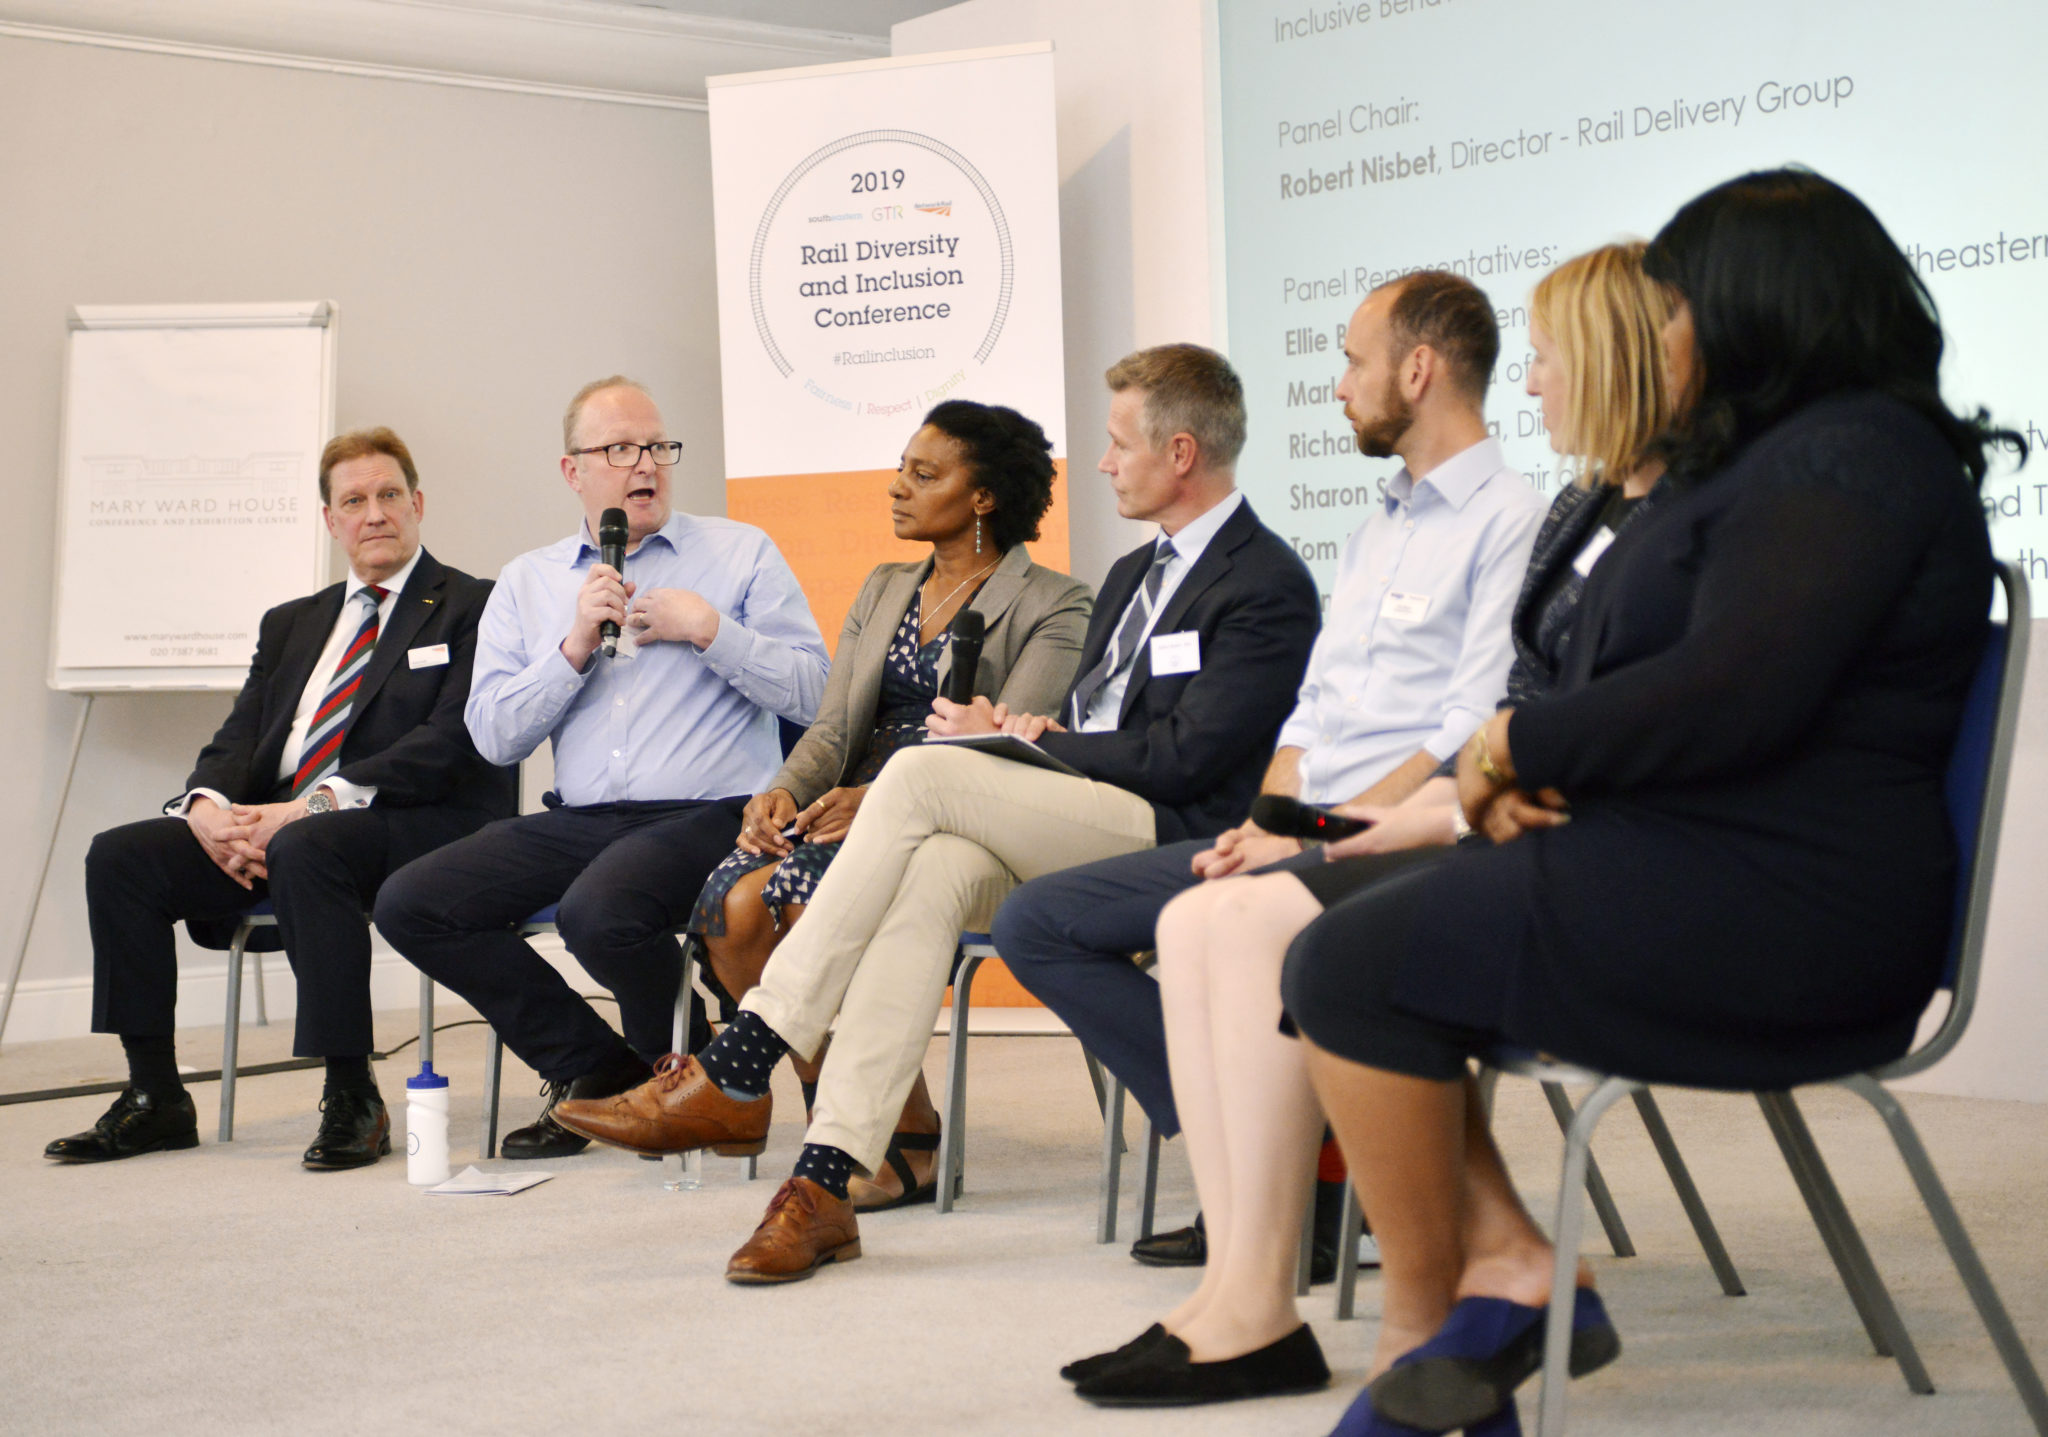 Network Rail Diversity and Inclusion Conference addresses diversity in the rail sector